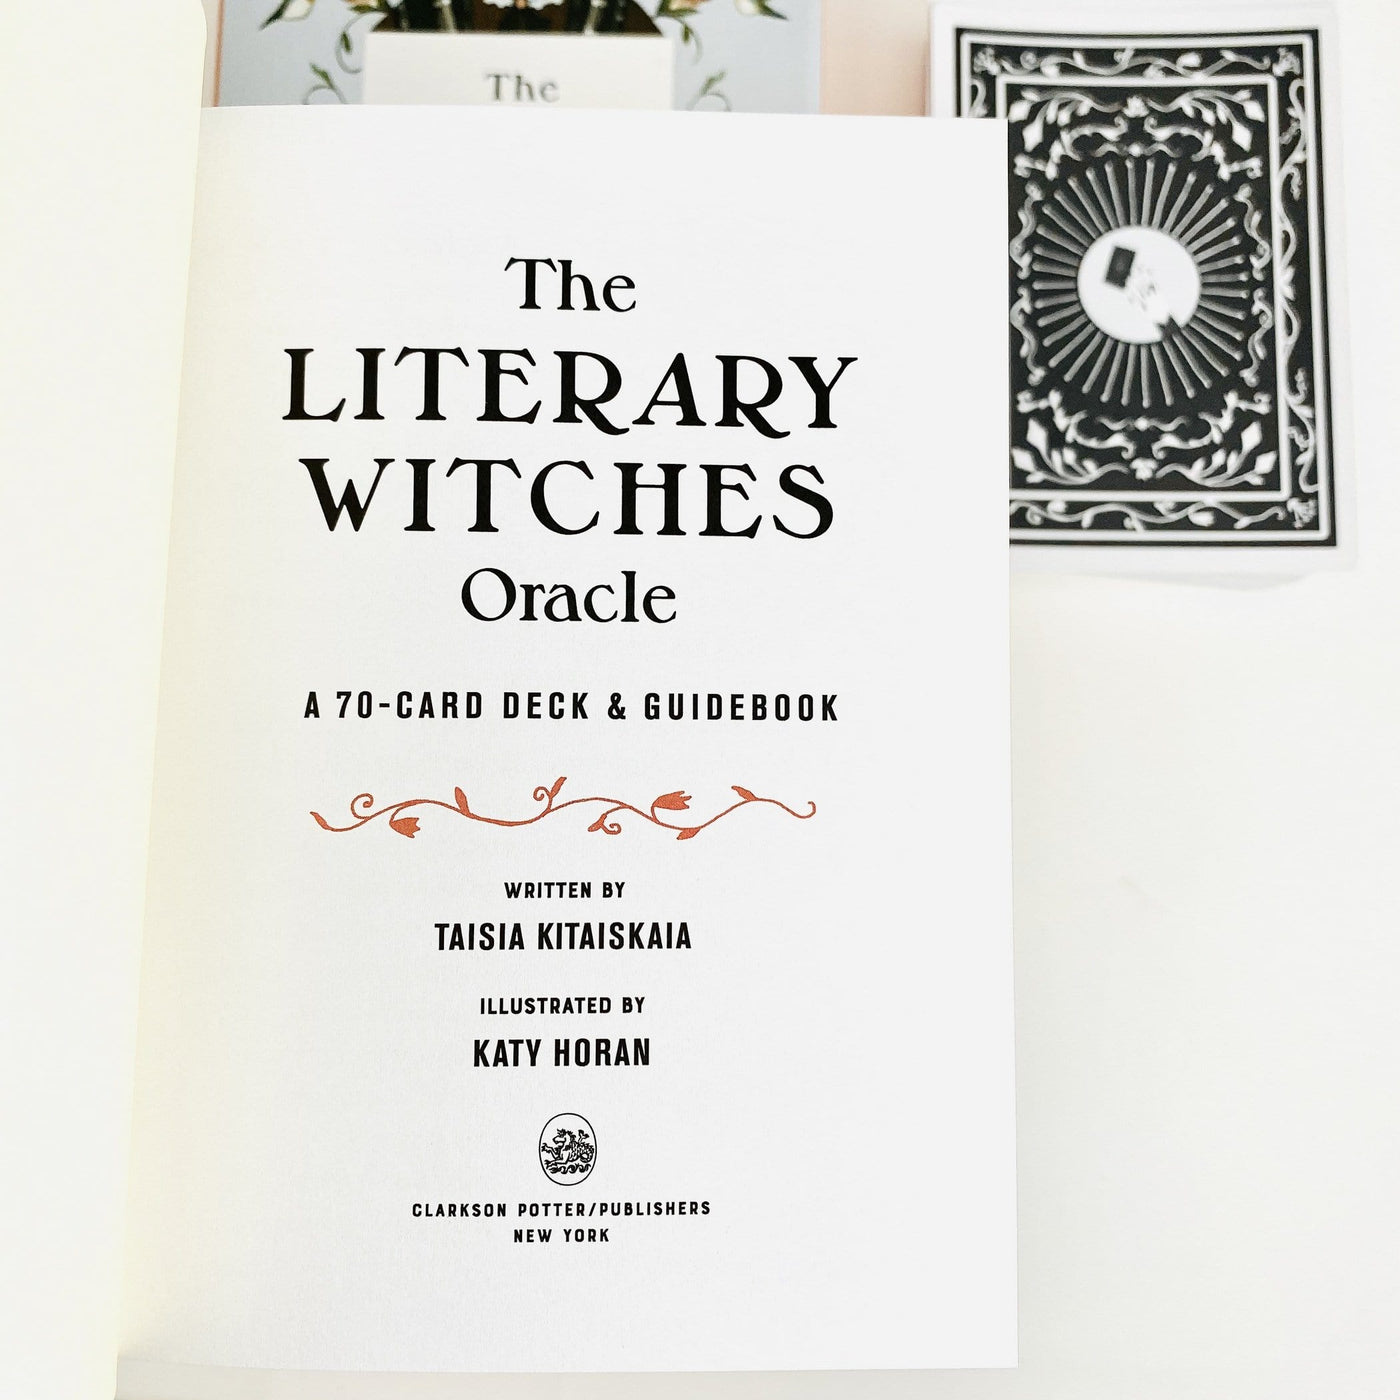 The cover of The Literary Witches Oracle 